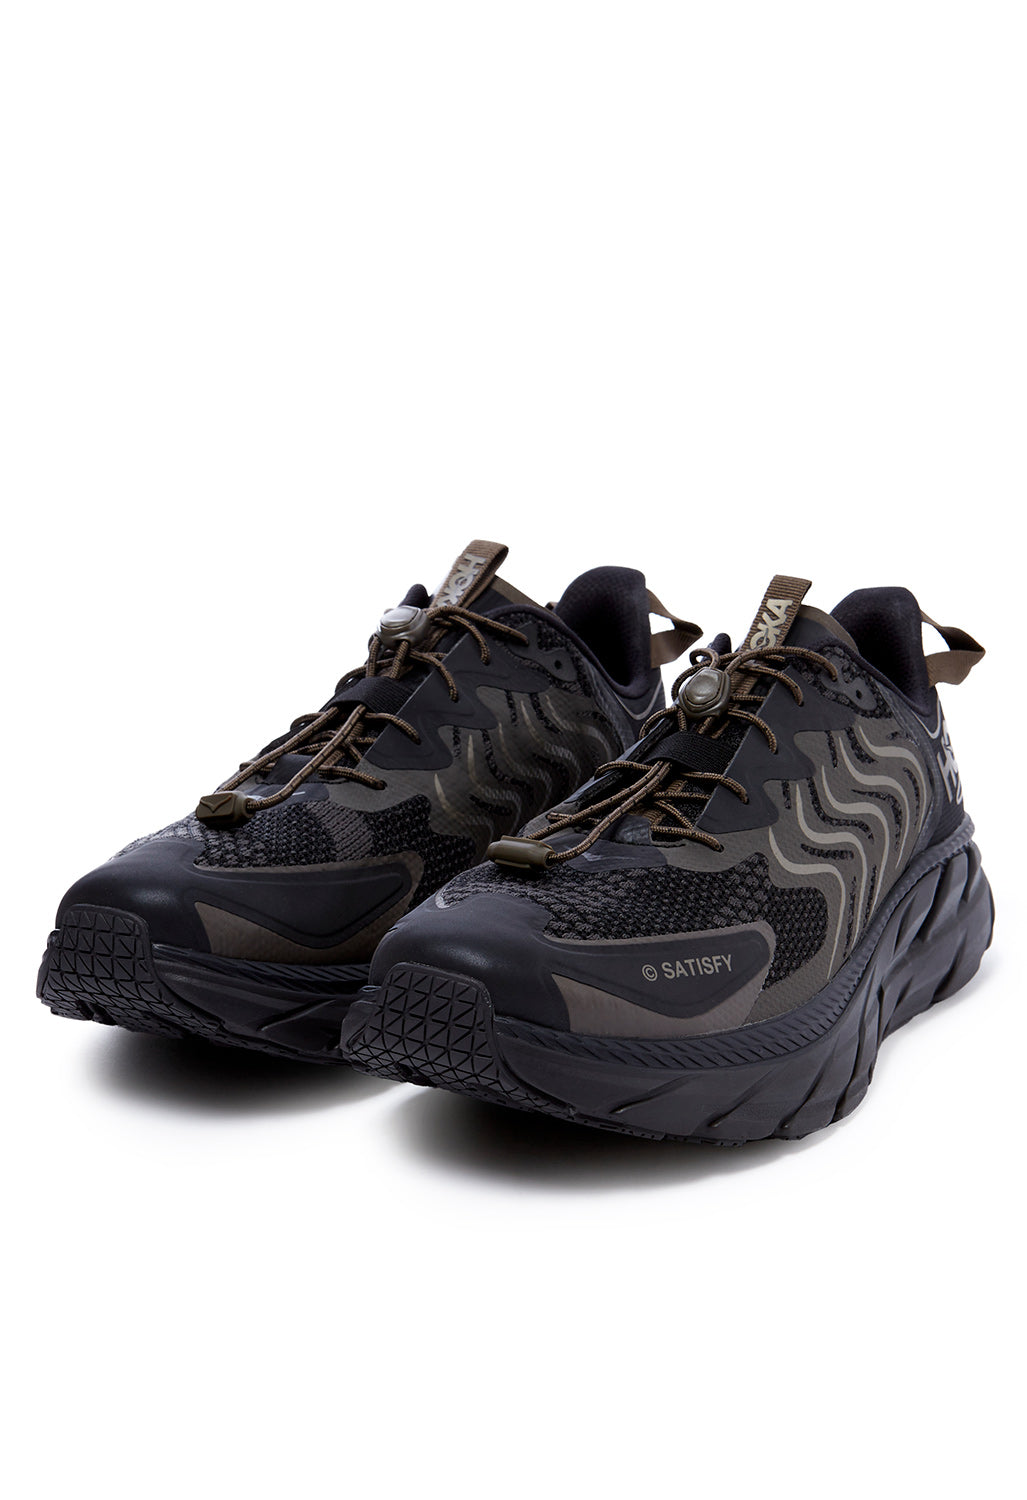 Hoka Clifton LS Satisfy Running Shoes - Forged Iron / Black – Outsiders ...